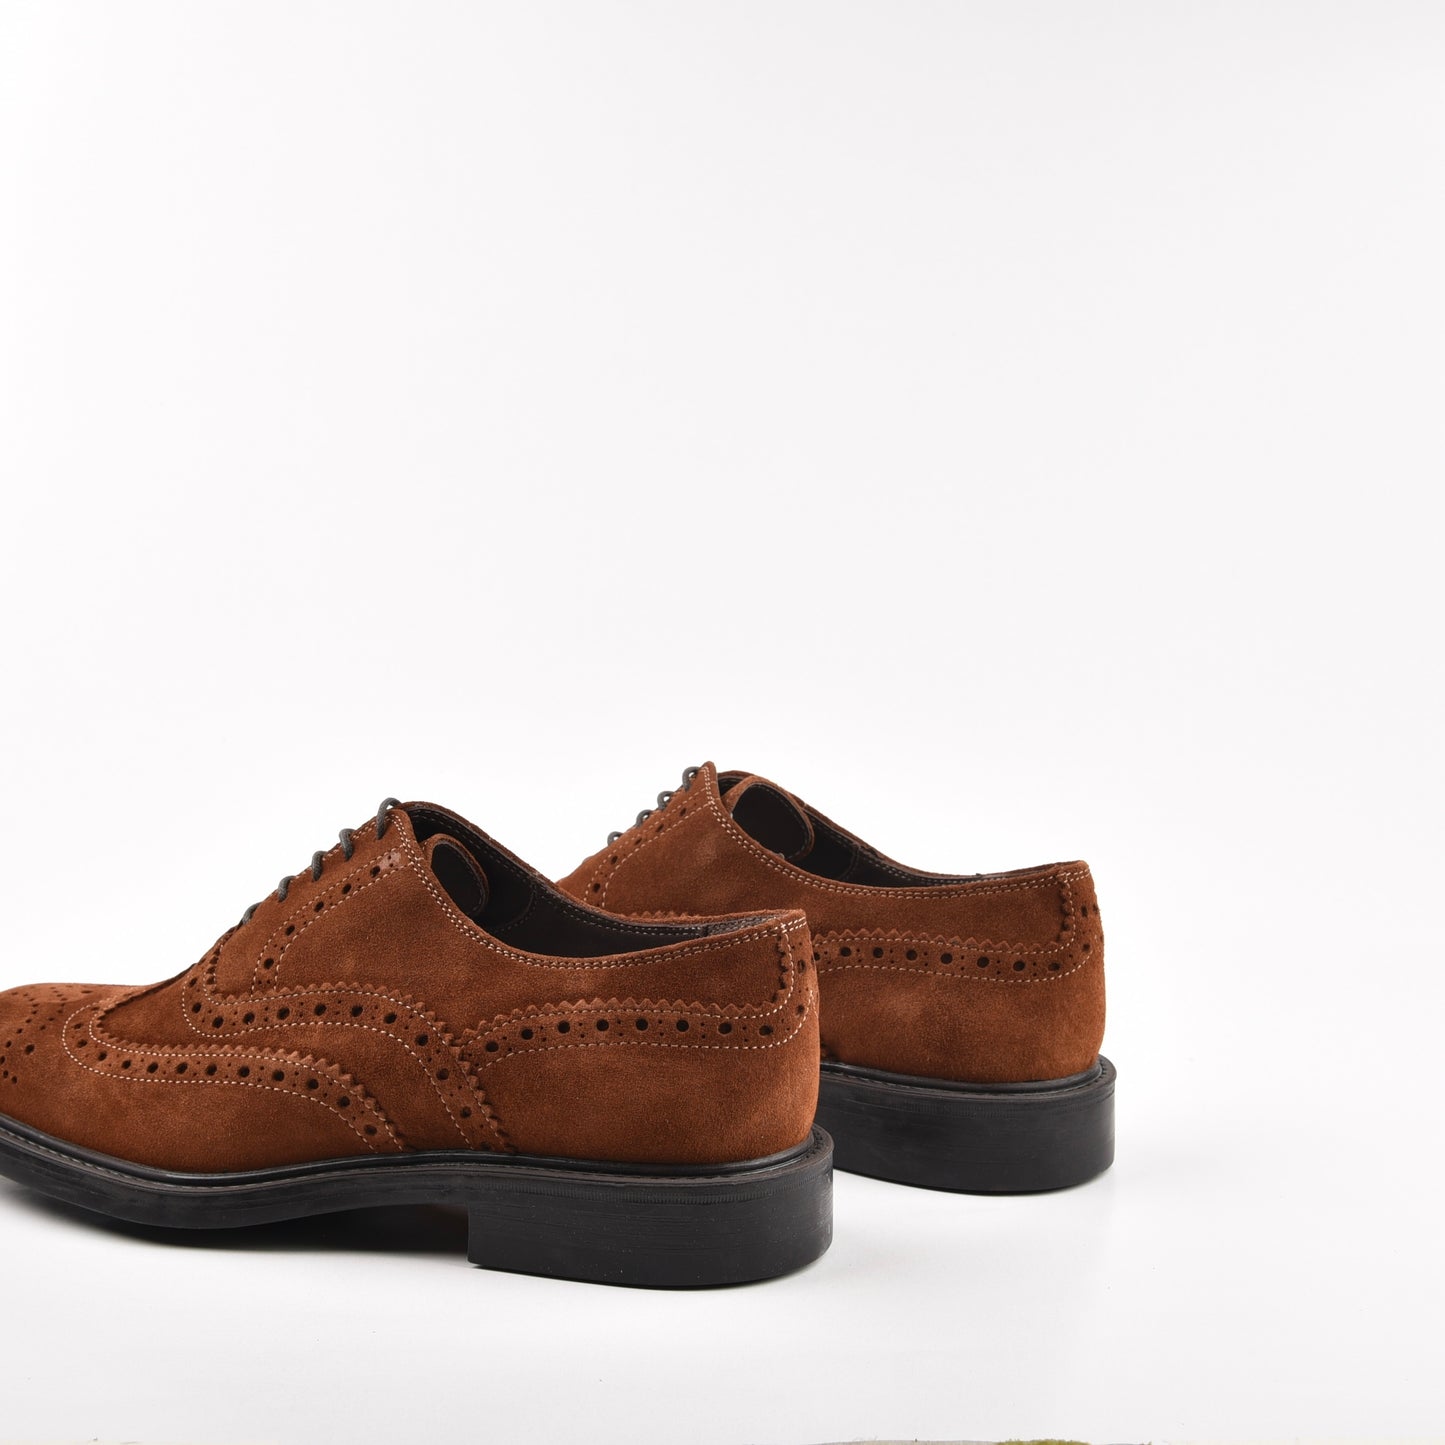 Shalapi Italian Oxford lace up for men in suede Camel